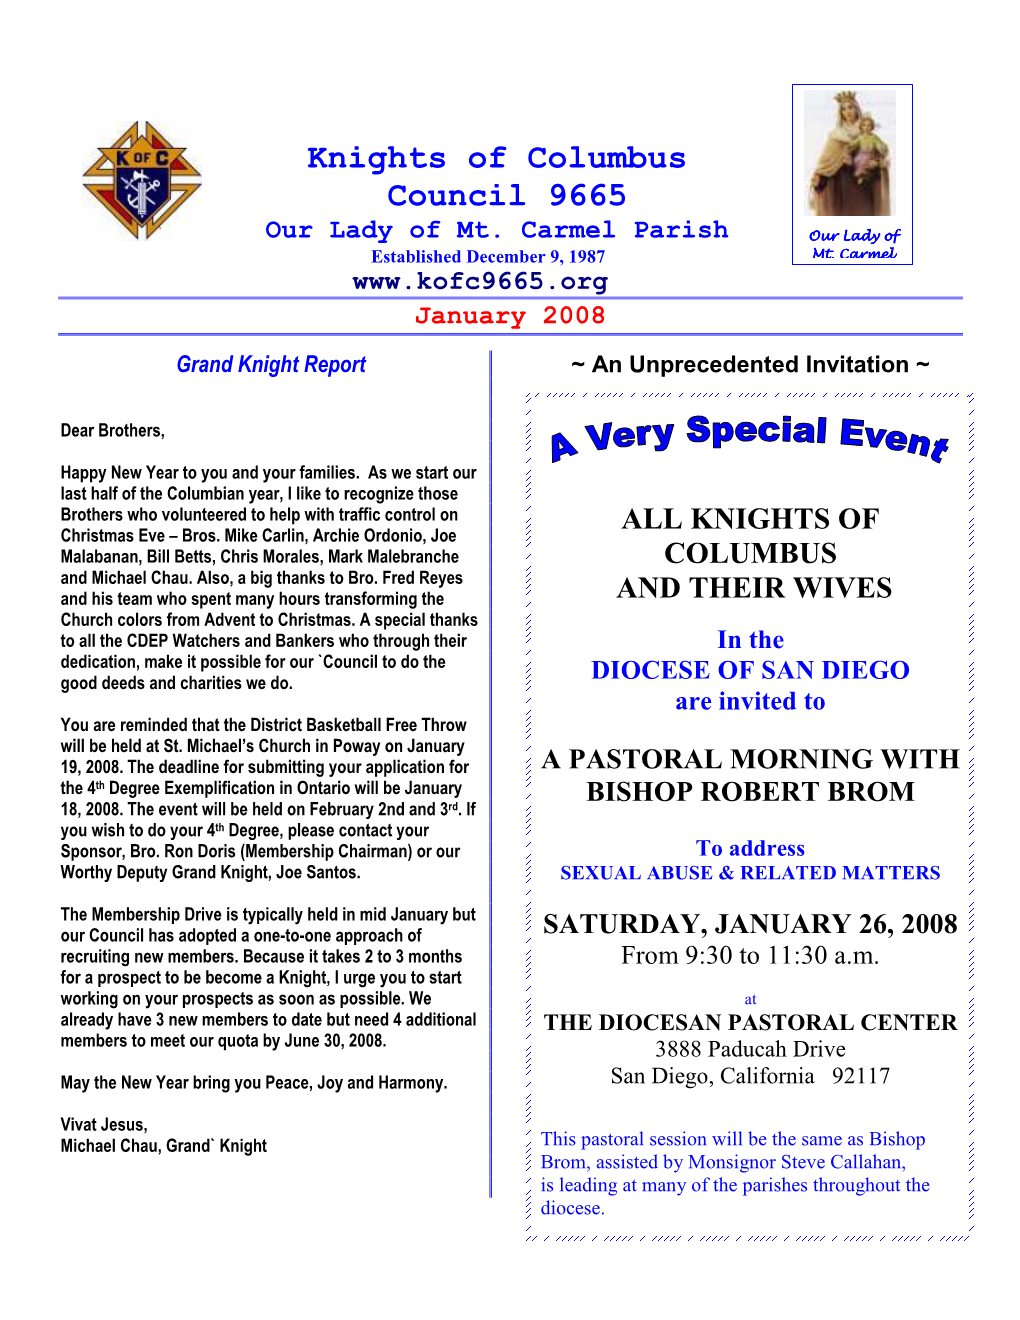 Knights of Columbus Council 9665